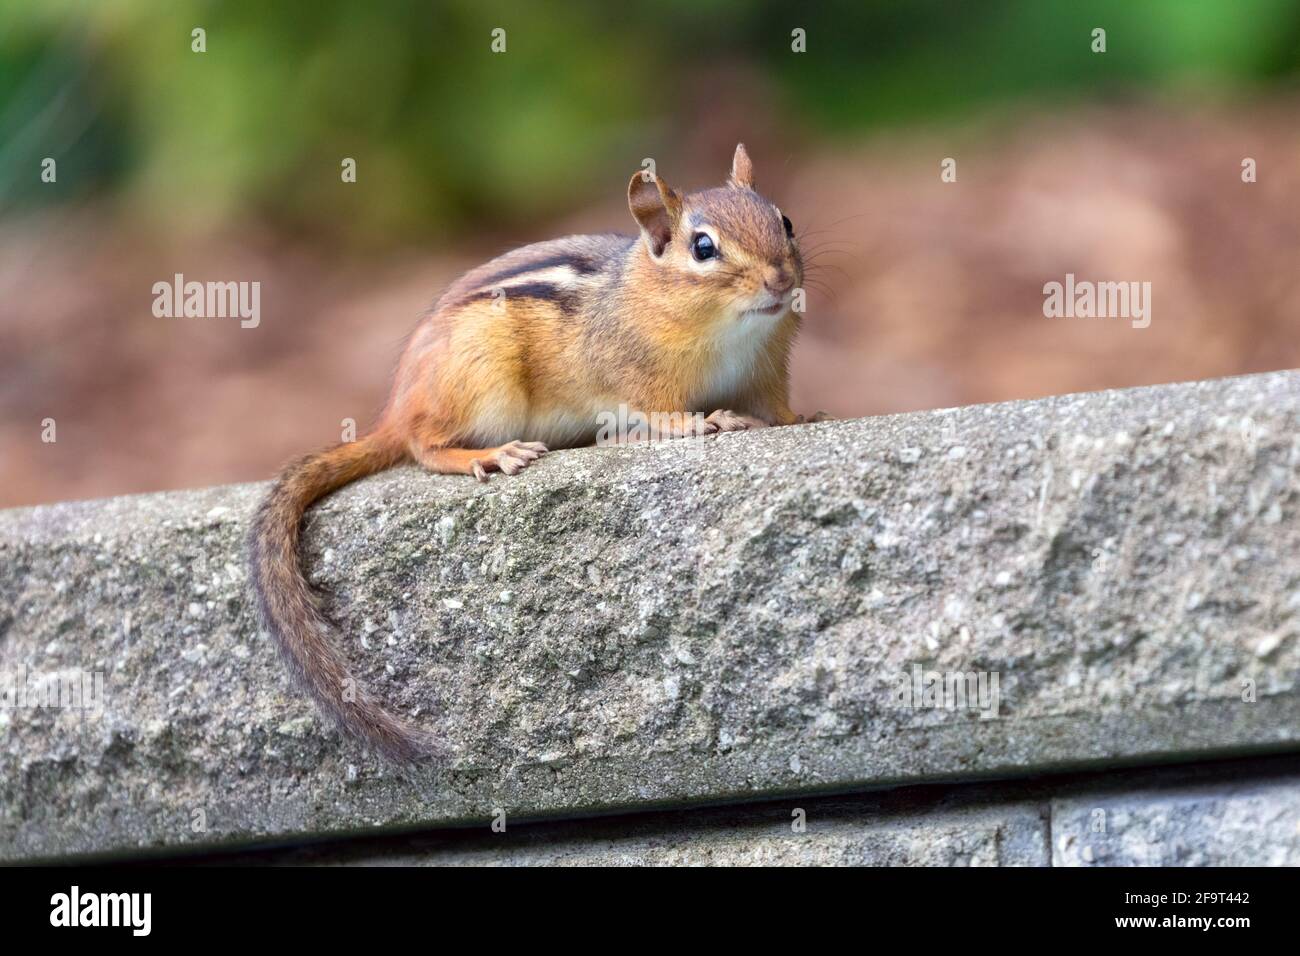 A chipmunk in front of a garden in Southwestern Ontario, Canada. Stock Photo